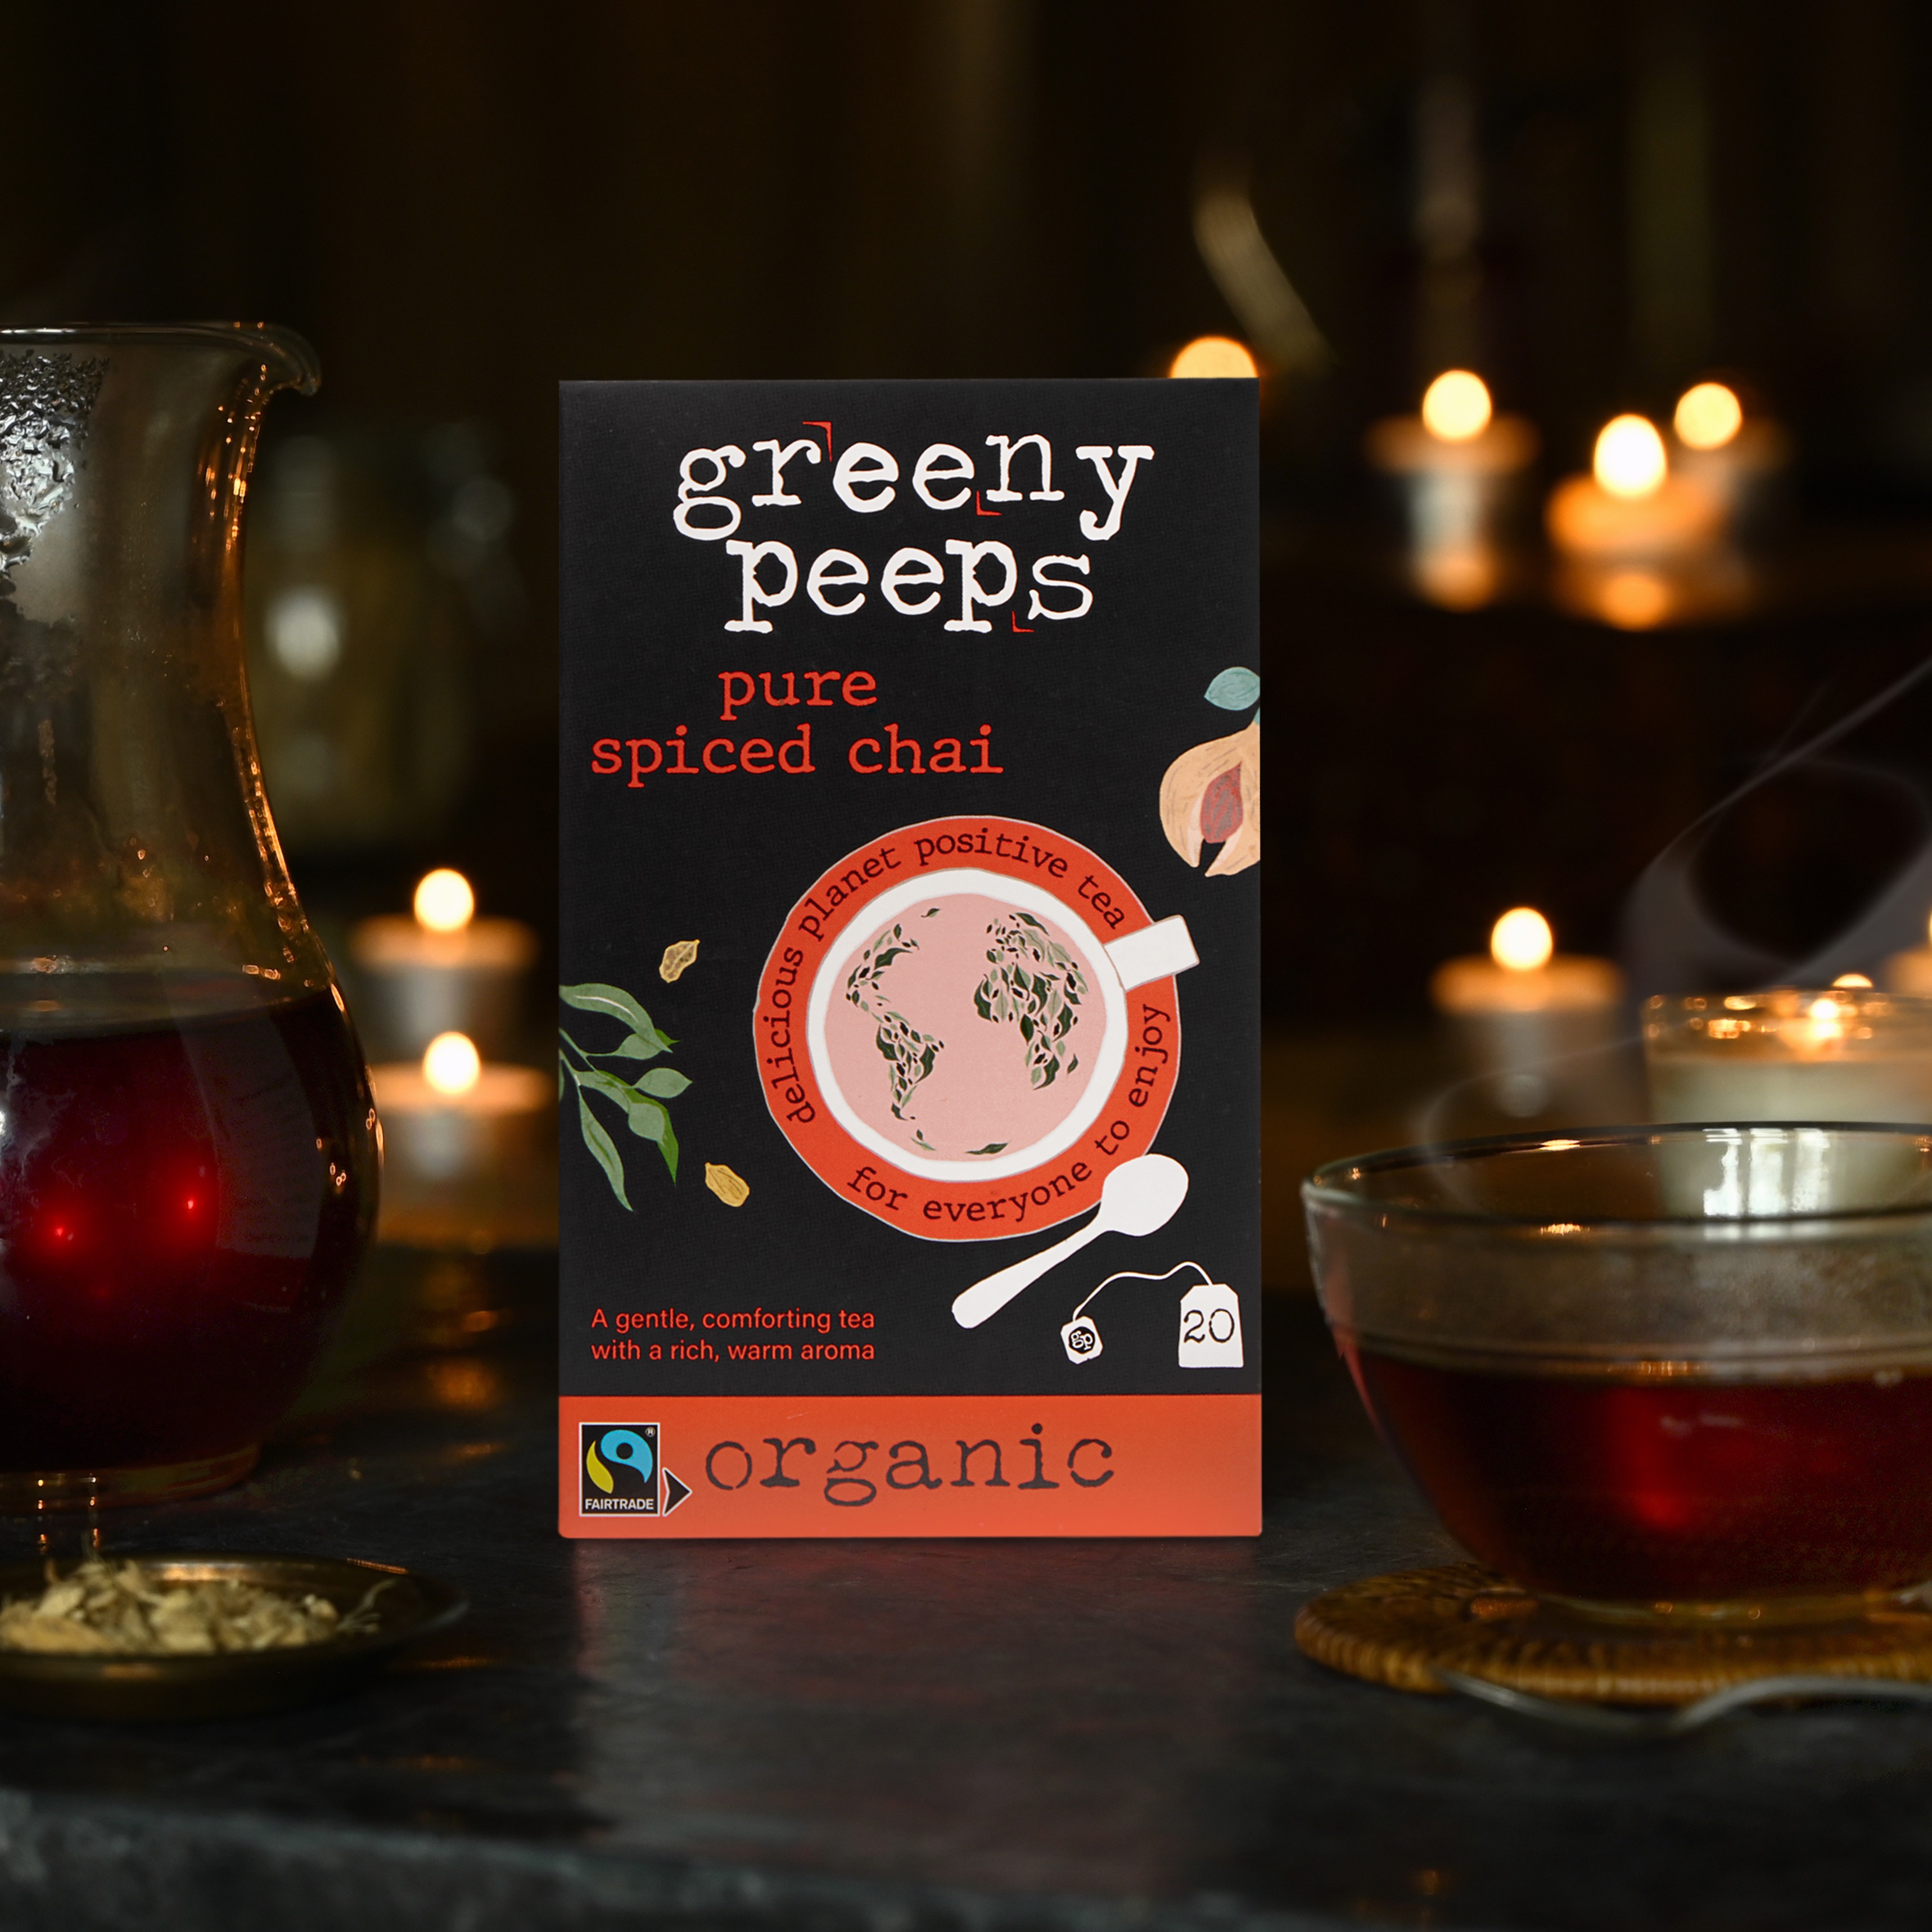 Greenypeeps Pure Spiced Chai